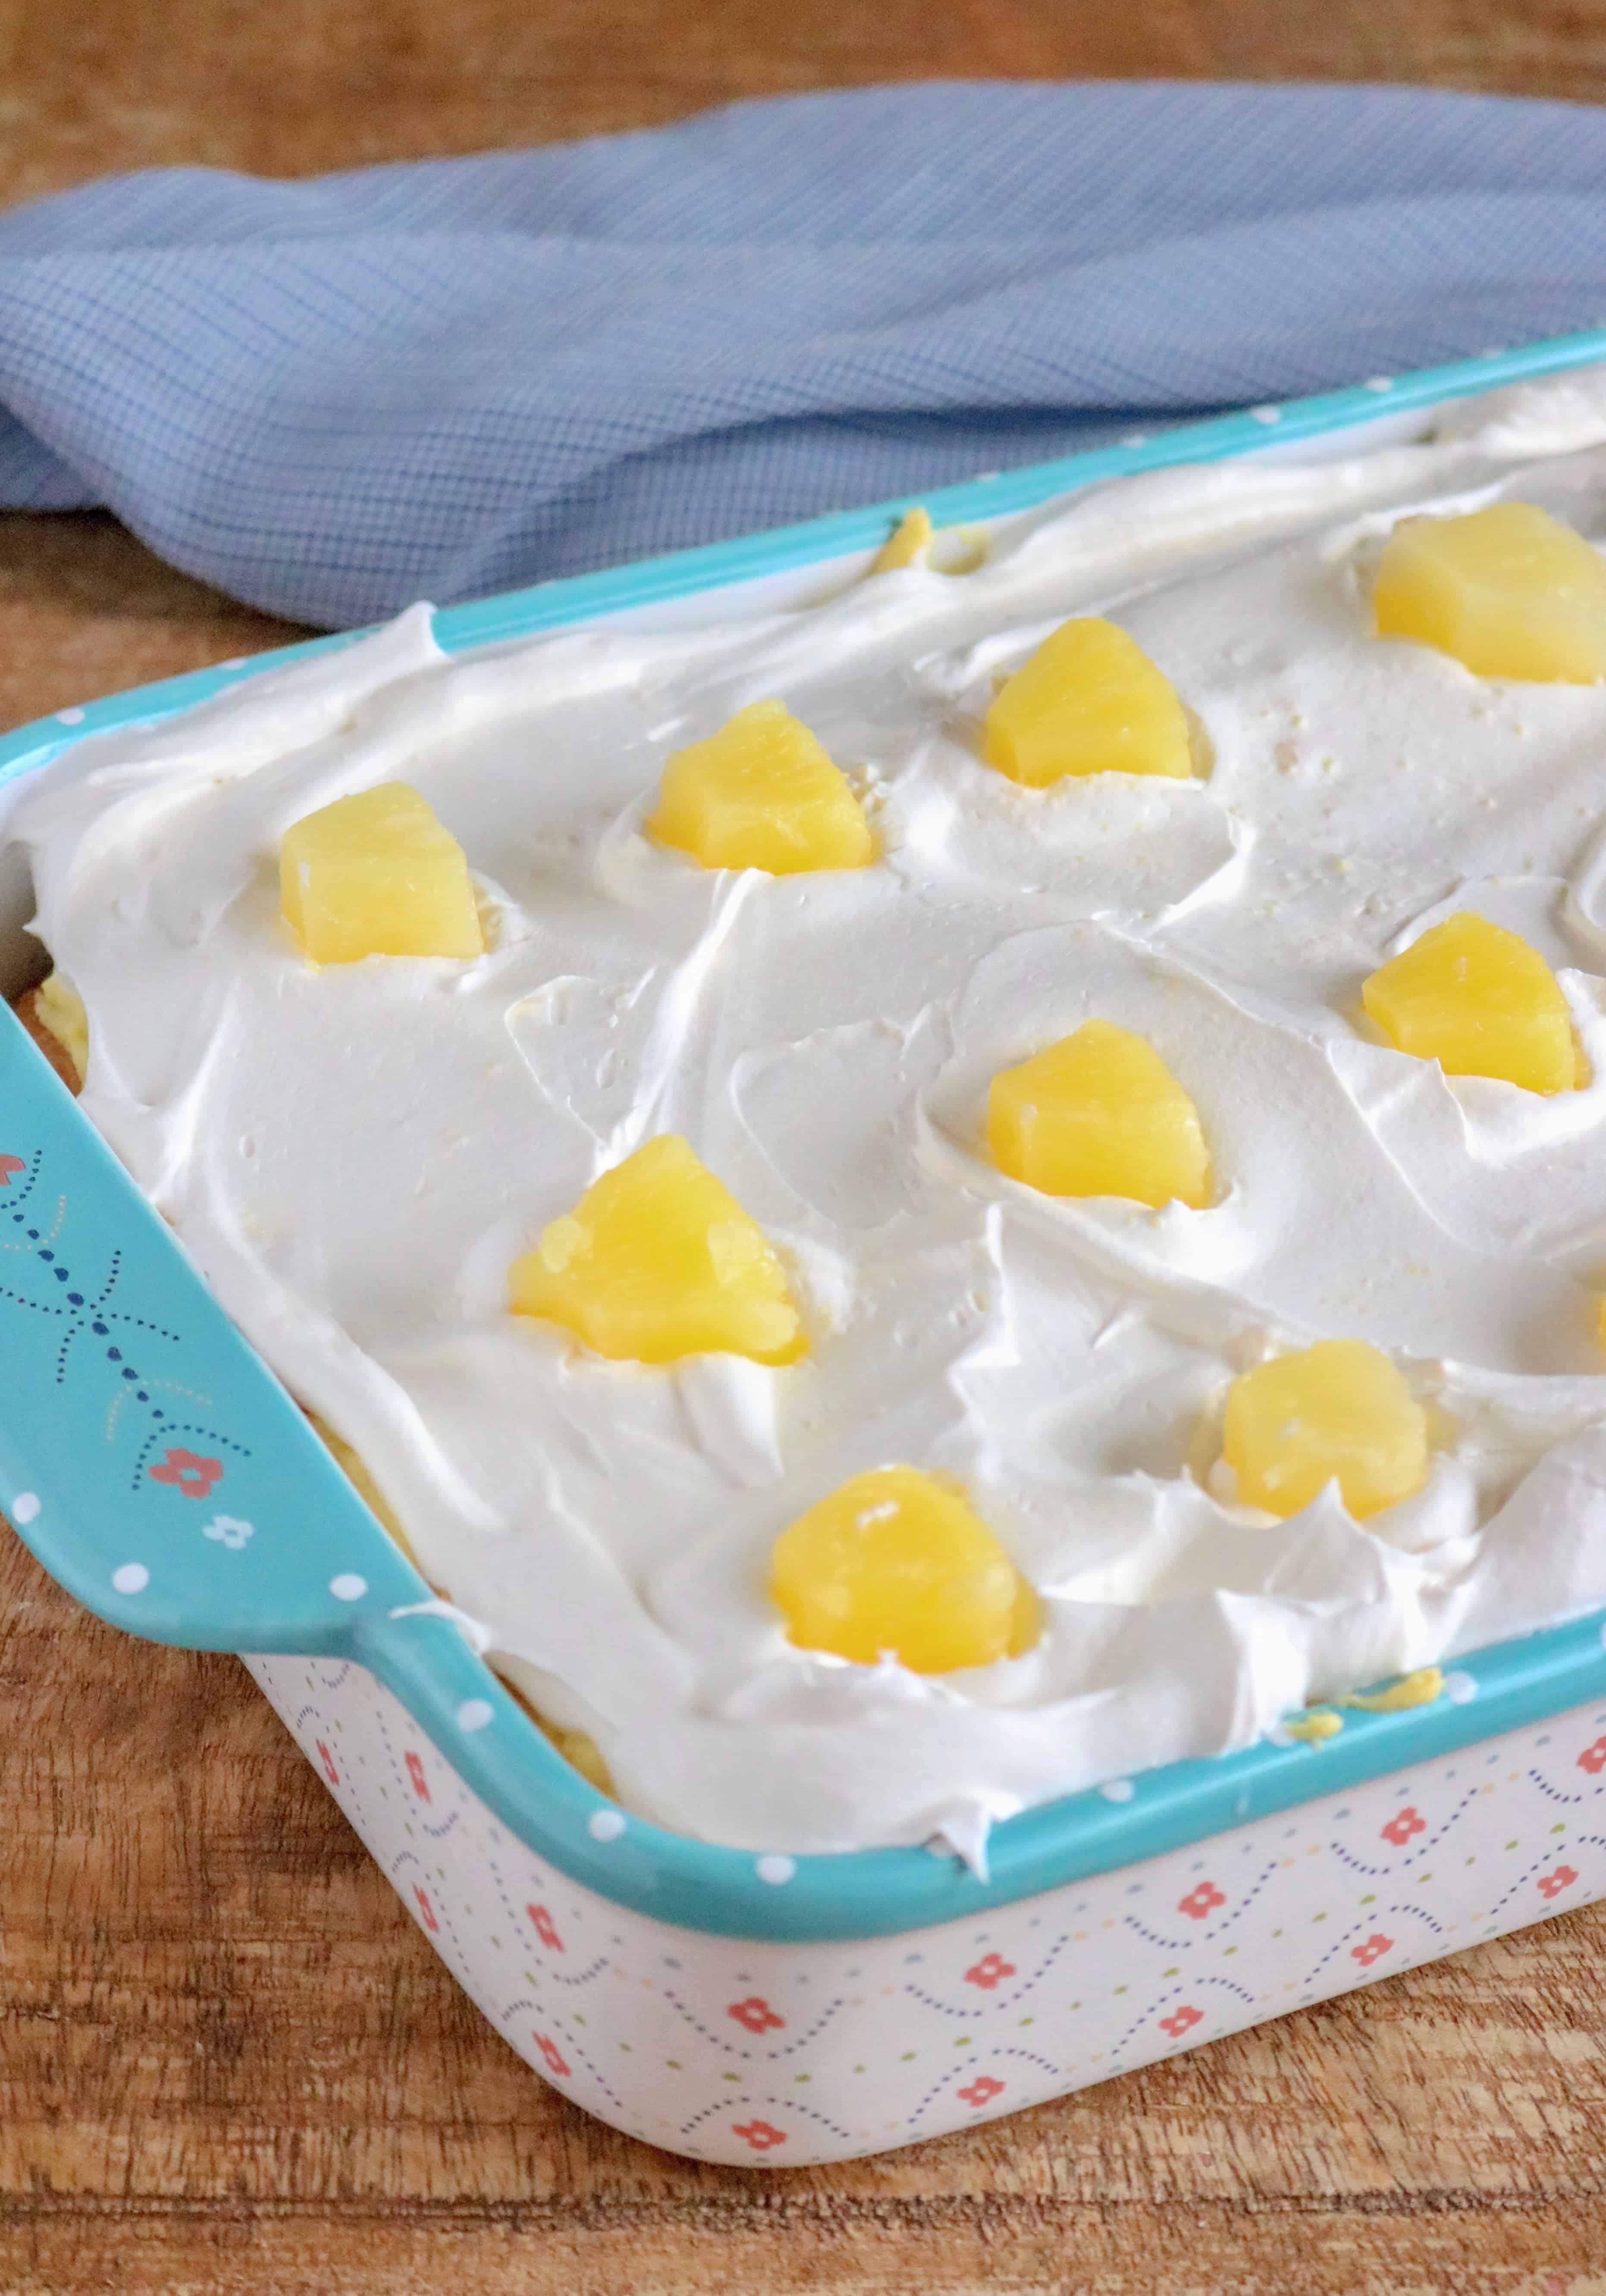 Cool Whip and pineapple chunks on top of pineapple slices, whipped topping